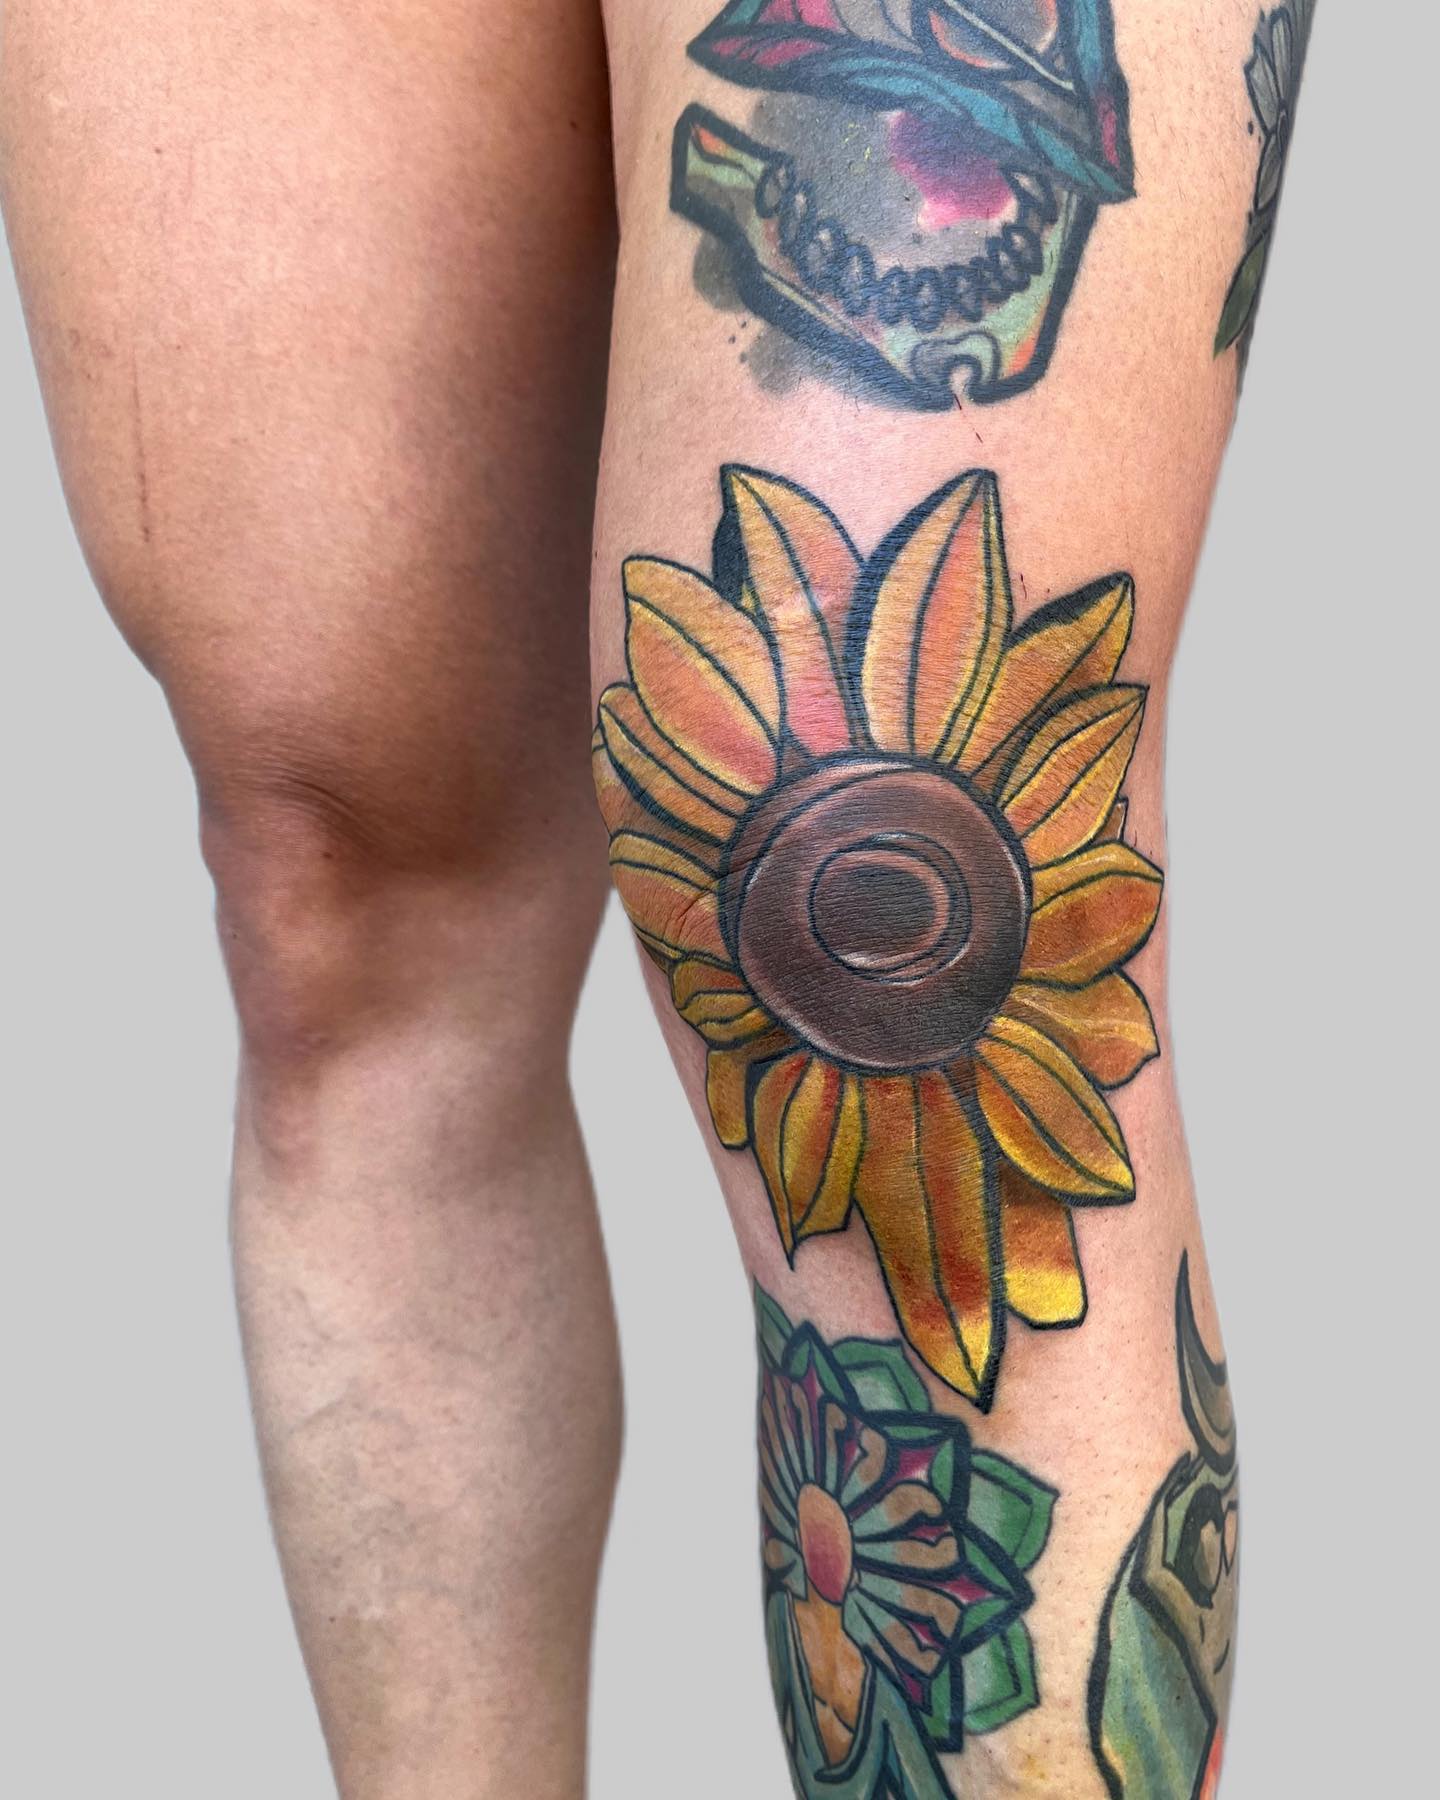 Sunflower tattoos are a common design by both guys and girls. This design symbolizes fun and calm spirits. Guys who love the summer season will also like this yellow flower the most. If you know of someone who is a sunflower or who you love dearly, this is for you. Want to dedicate this design to them?